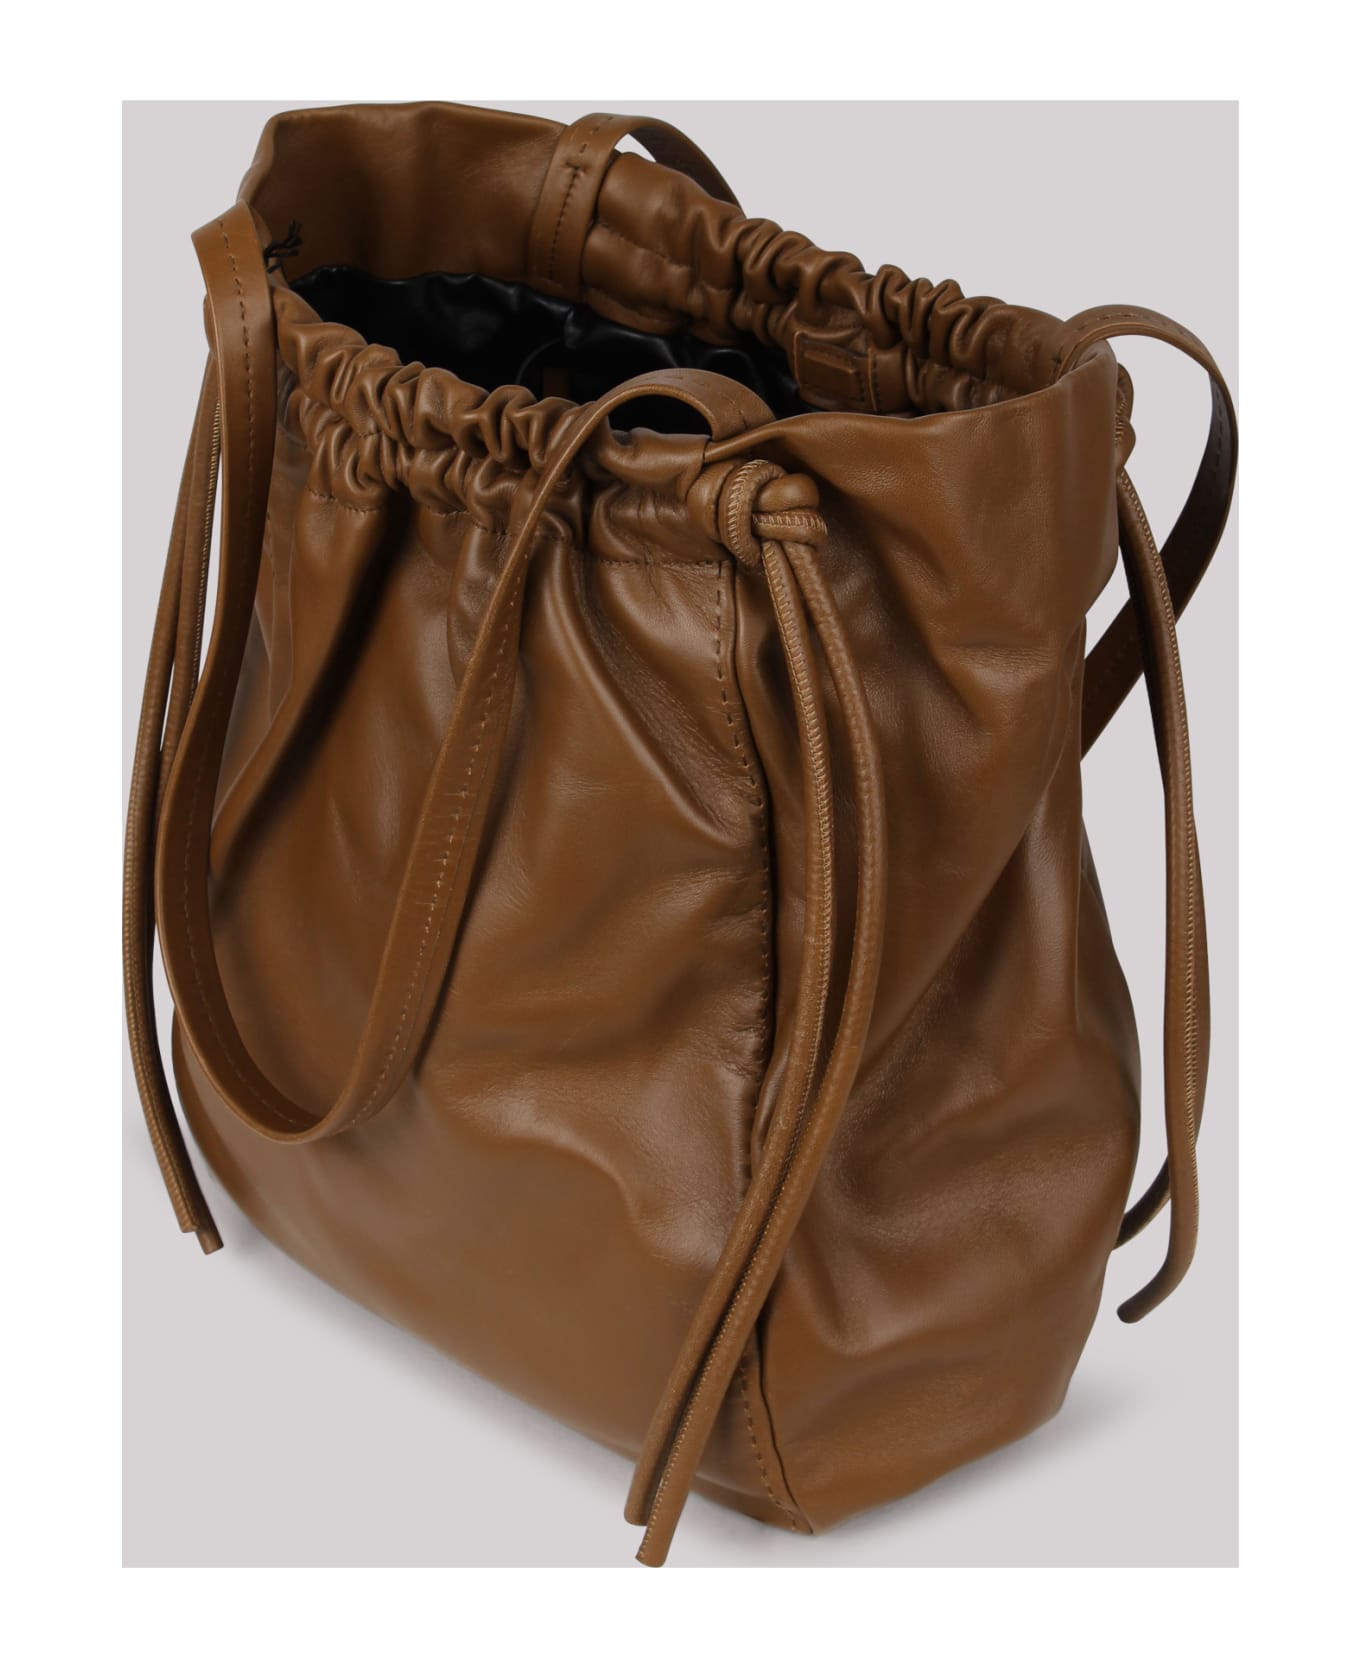 Proenza Schouler Leather Drawstring Tote